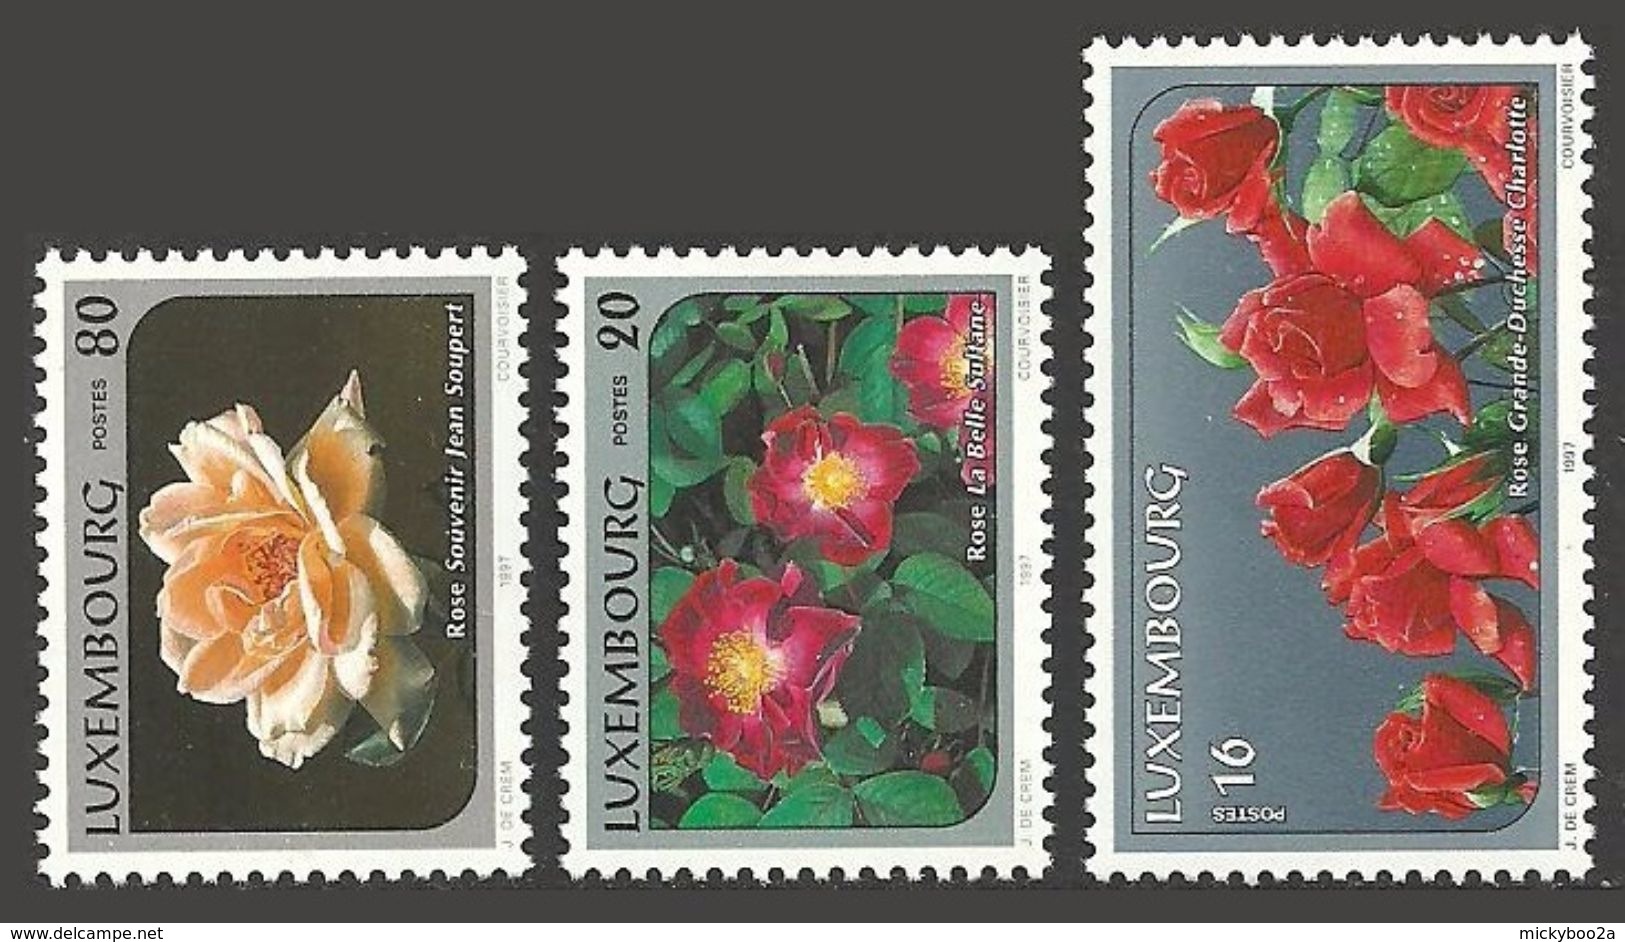 LUXEMBOURG 1997 FLOWERS ROSES FEDERATION OF ROSE SOCIETIES SET MNH - Neufs